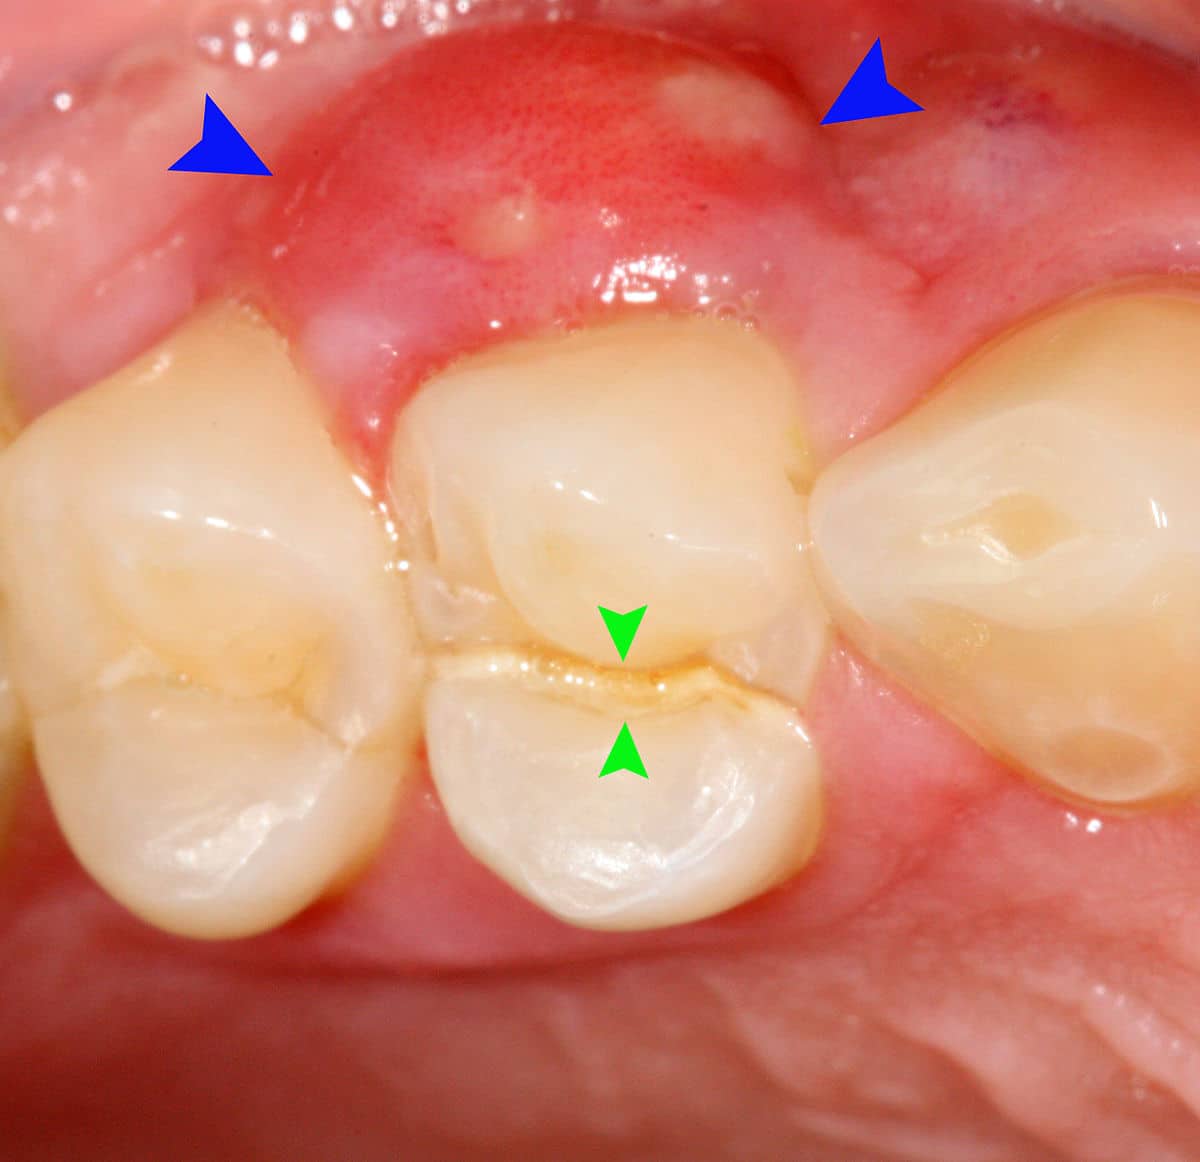 File:Cracked tooth lateral periodontal abscess.jpg